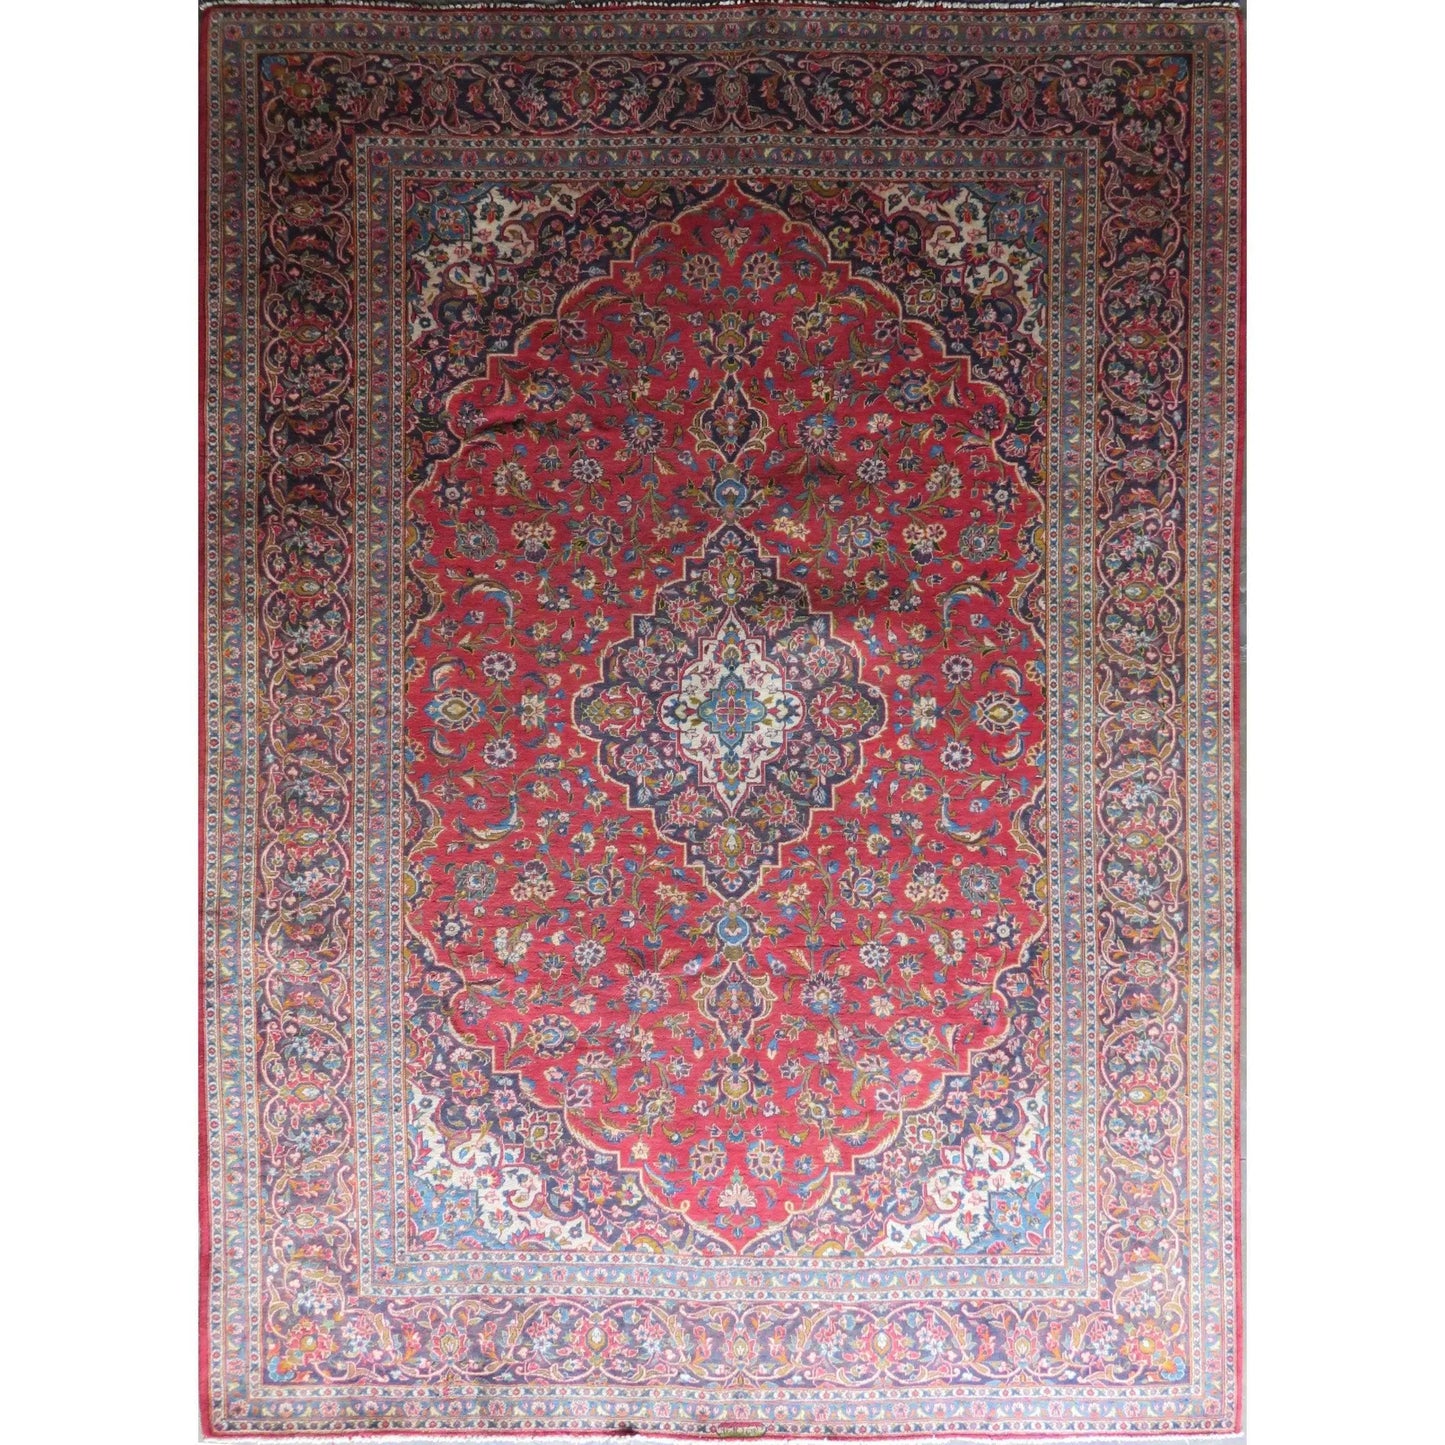 Hand-Knotted Vintage Rug 12'7" x 8'10"